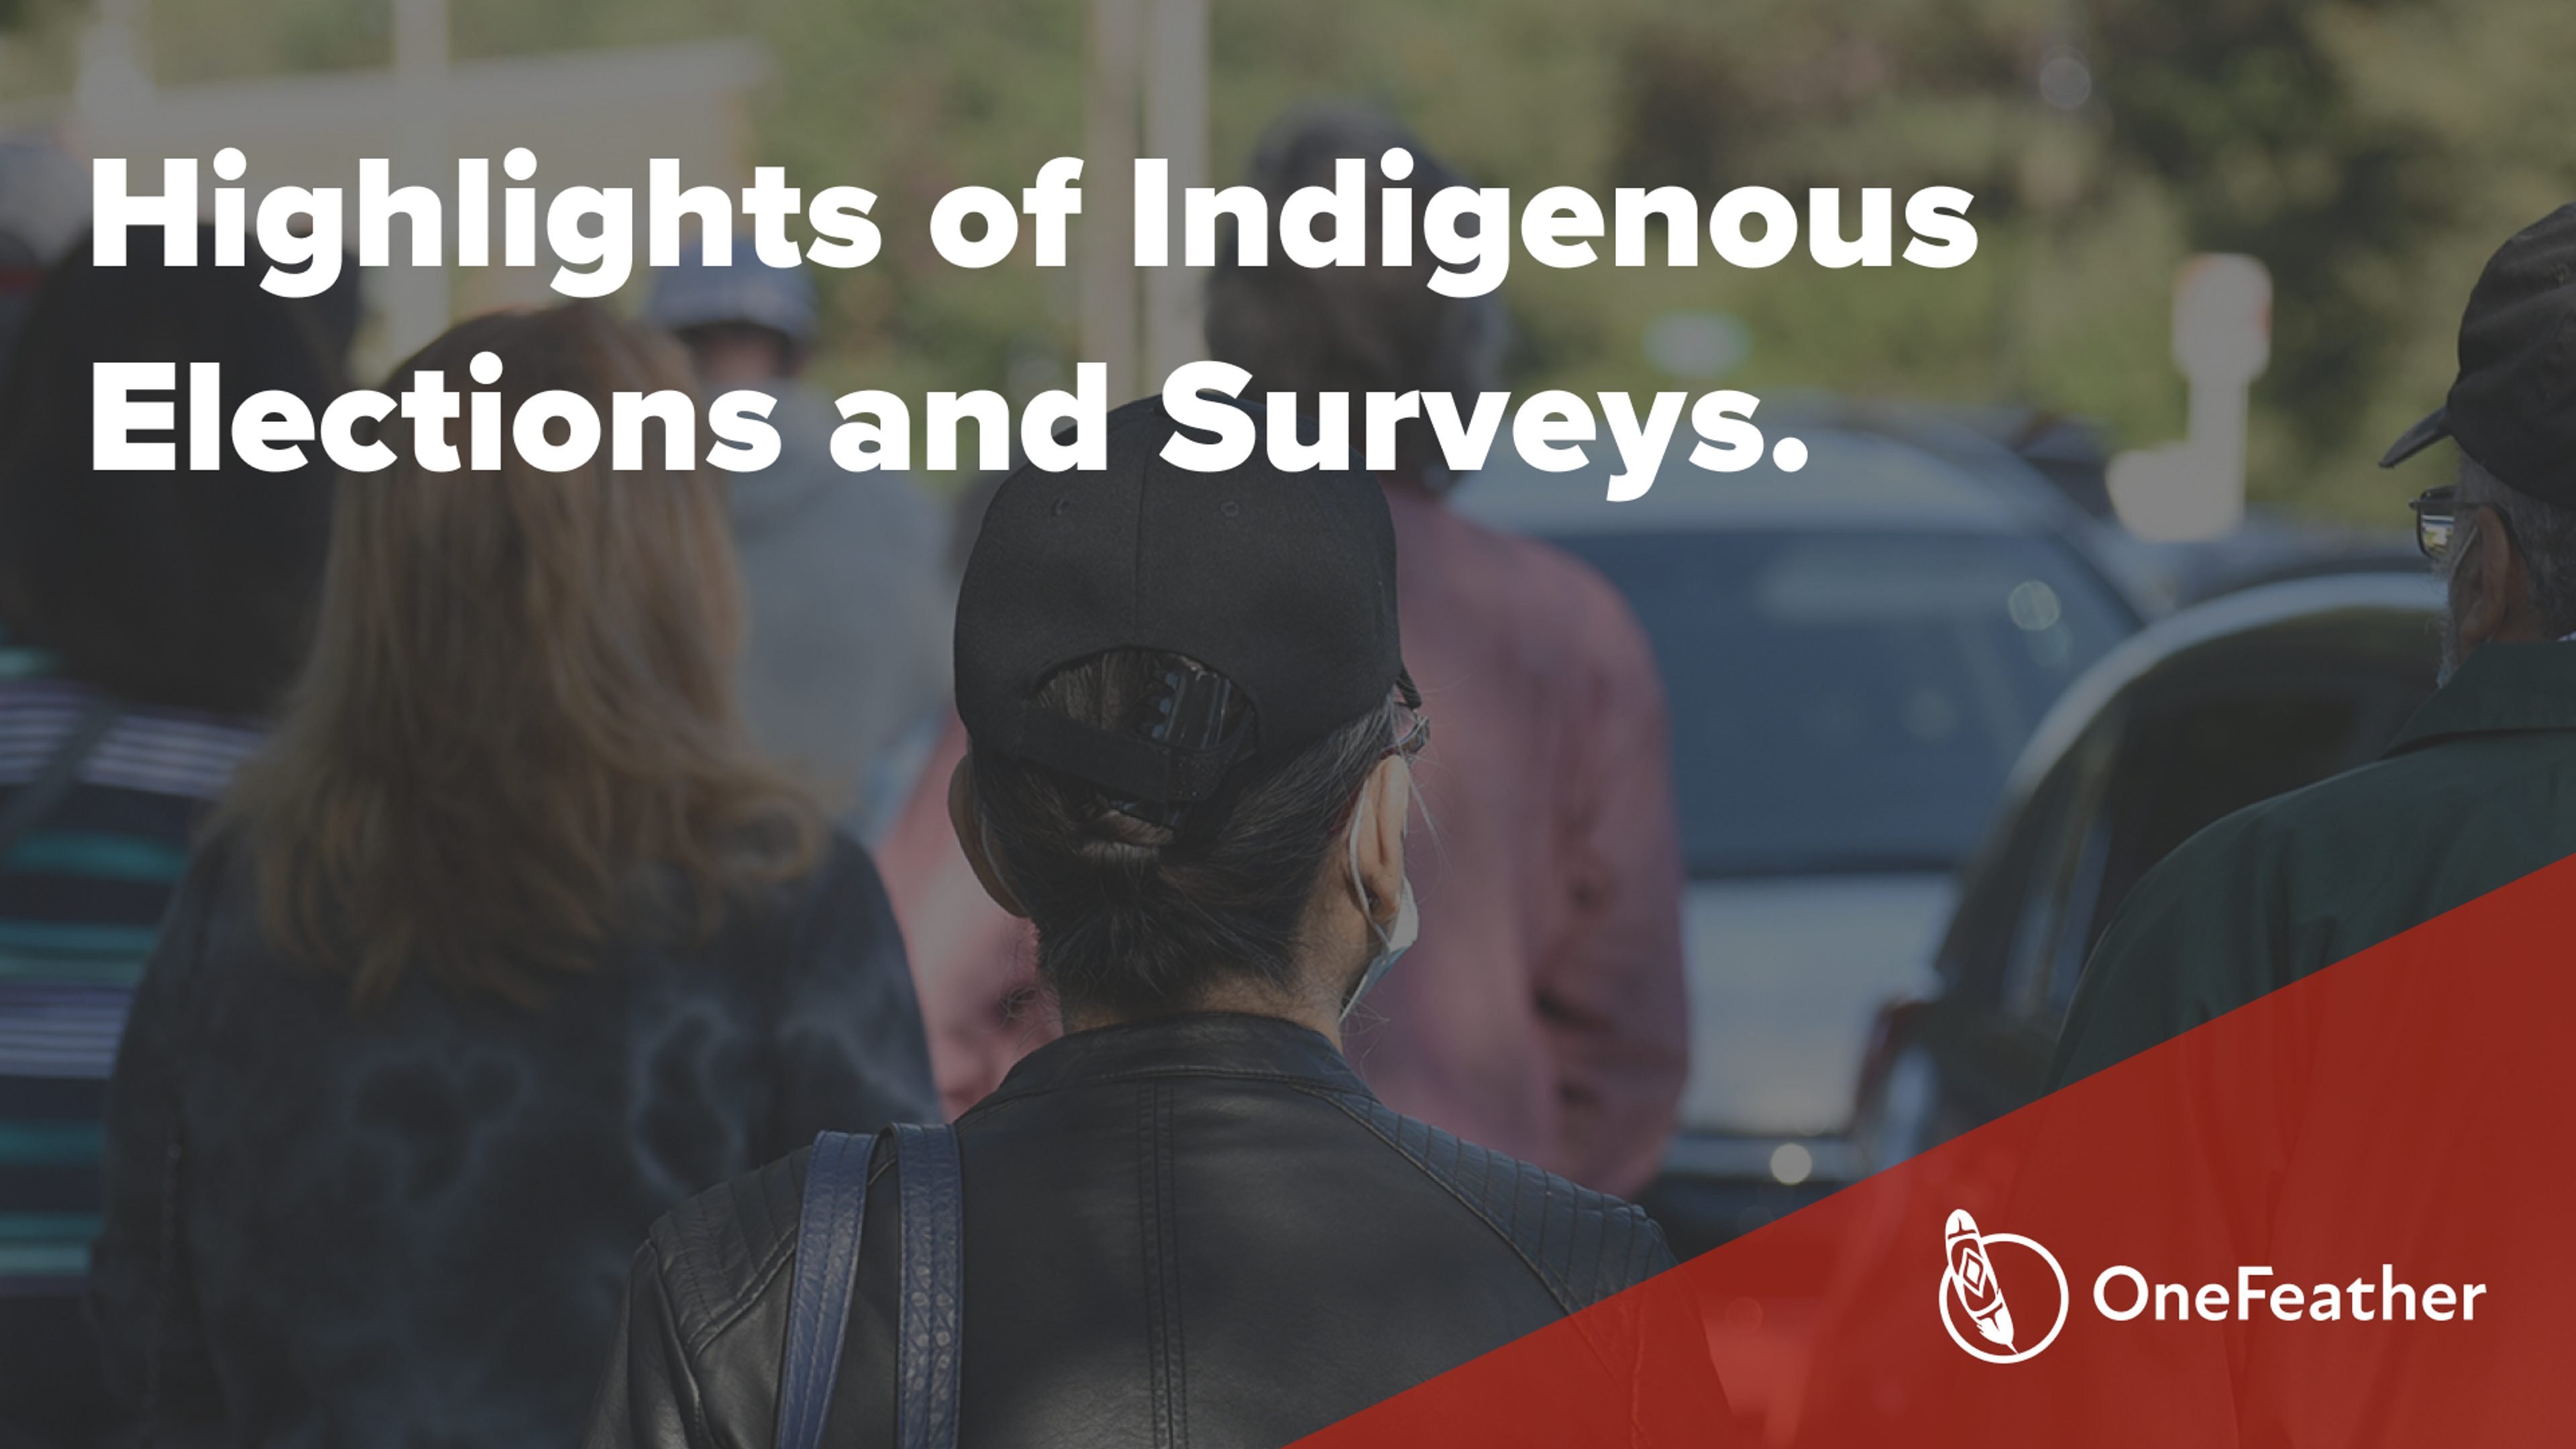 Cover Image for Indigenous Voters Across Canada Participate in Elections and Community Surveys